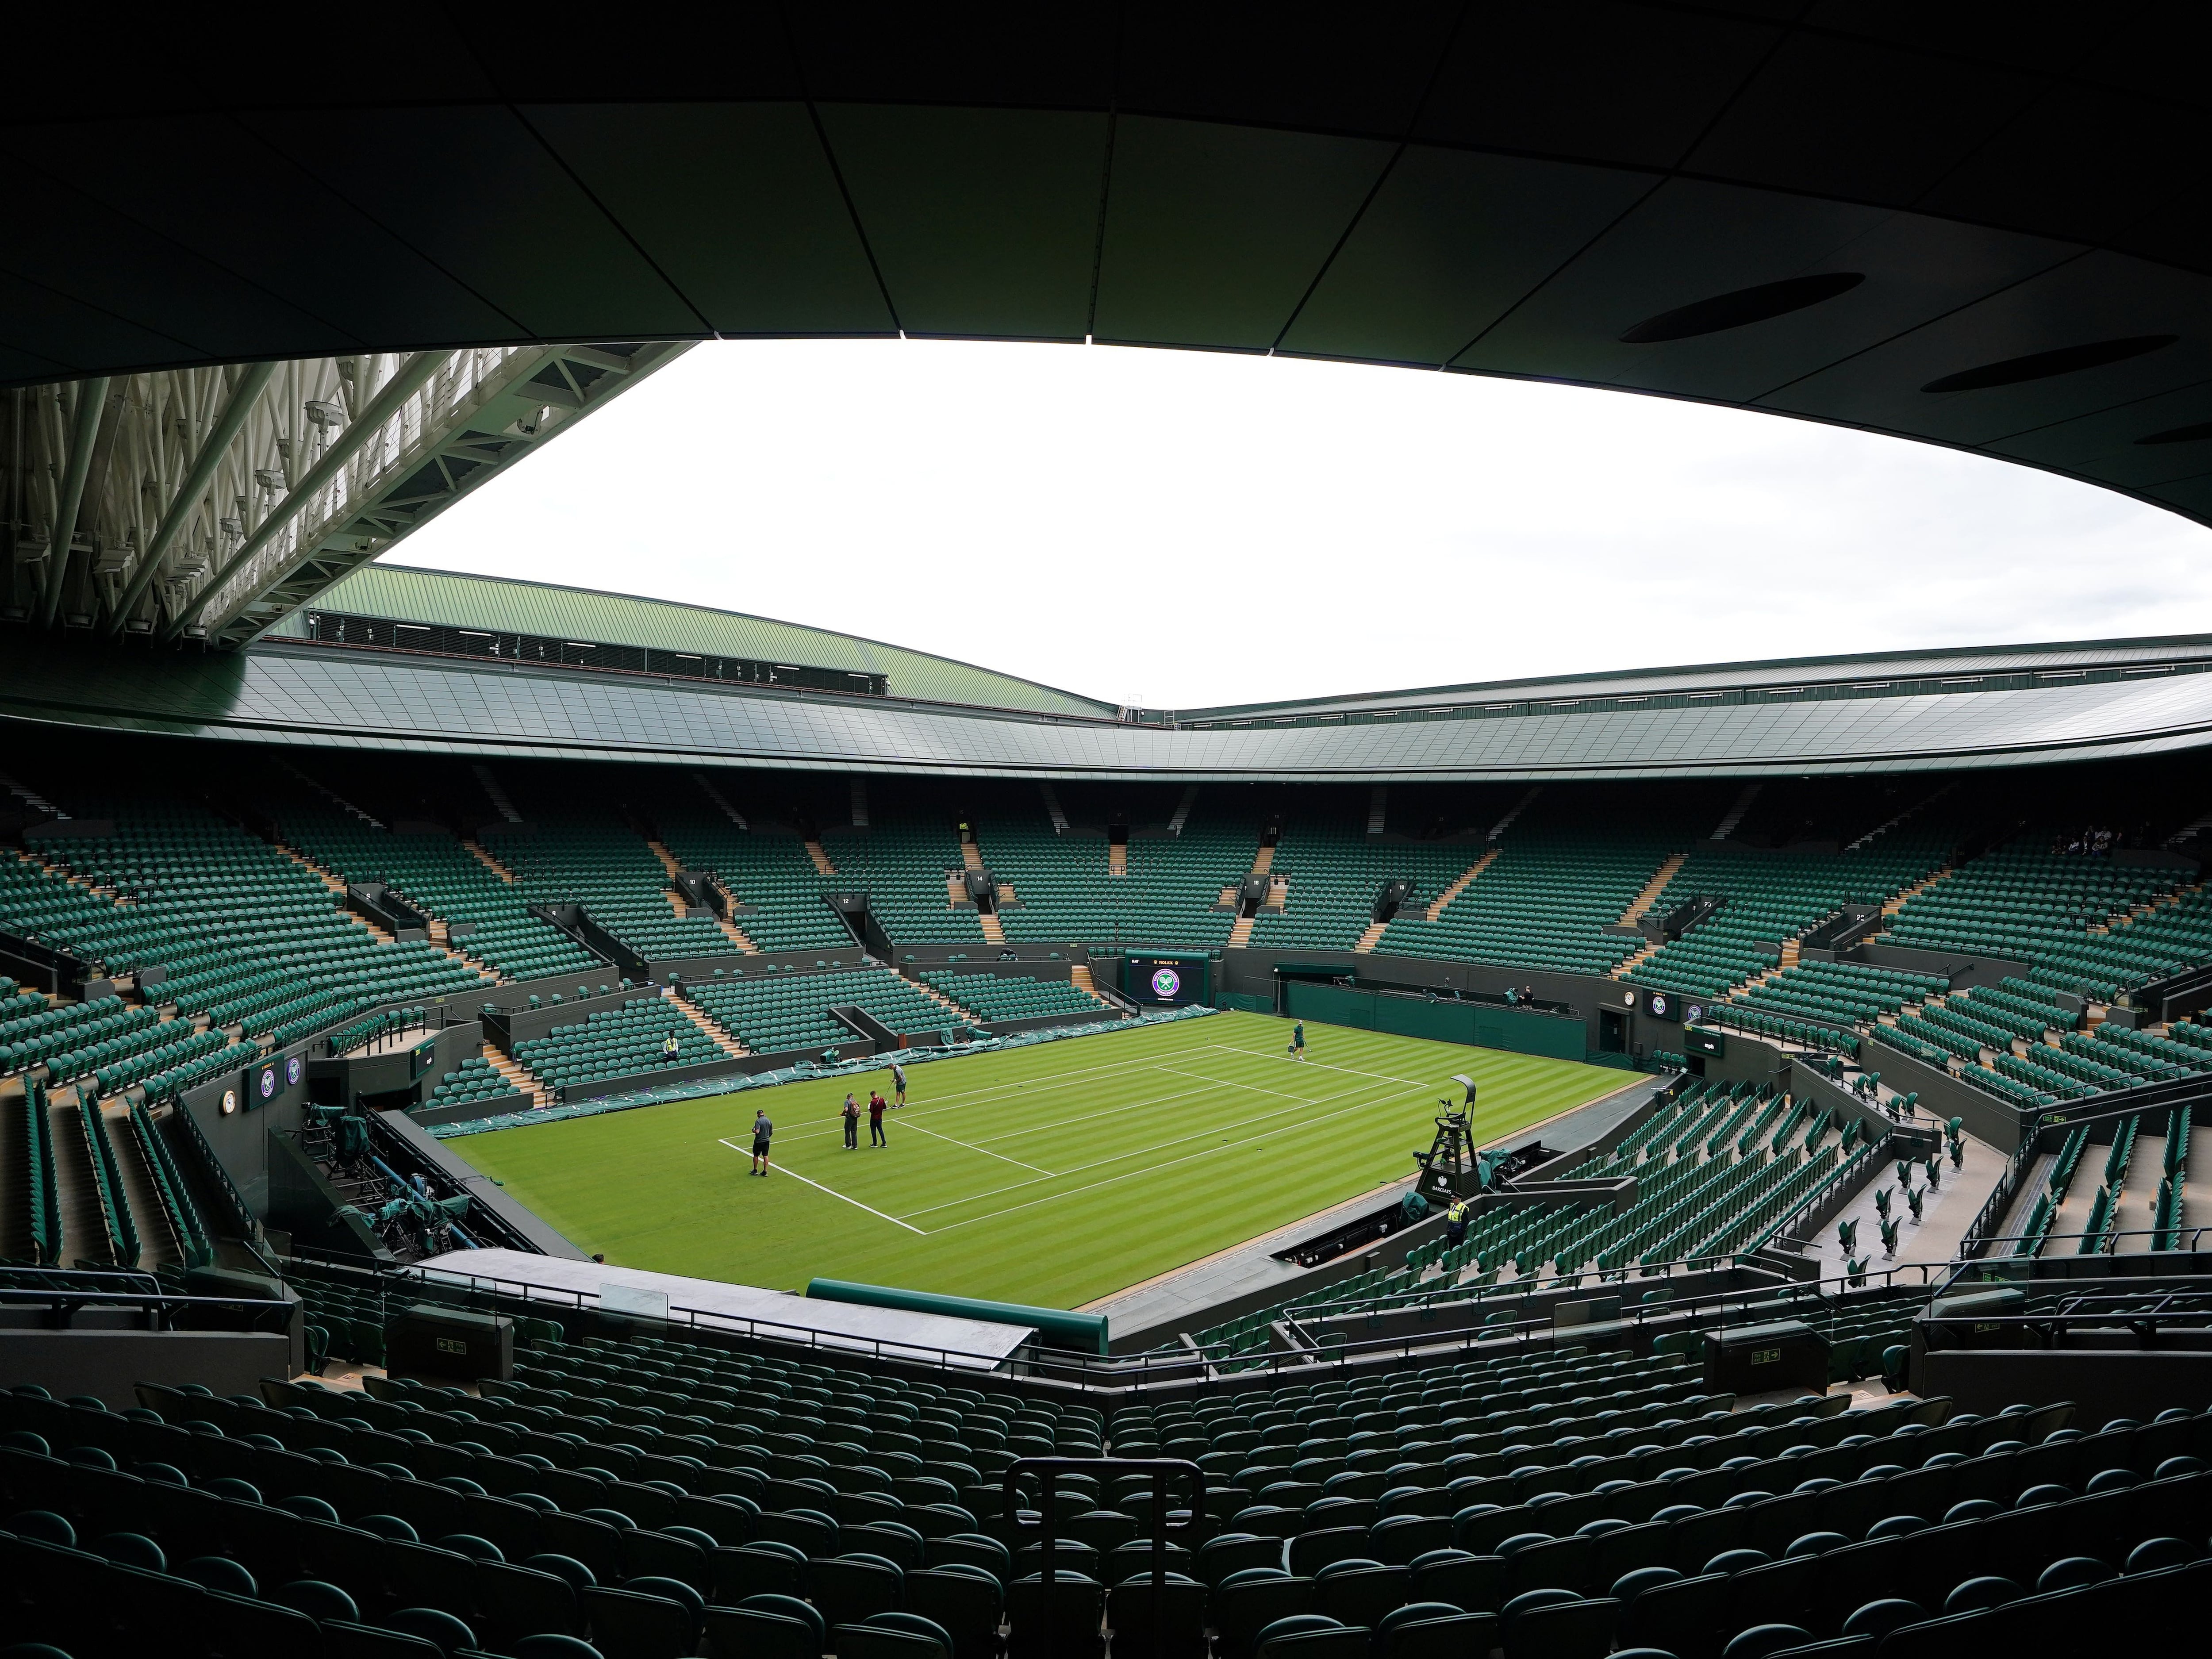 Showers forecast for first week of Wimbledon